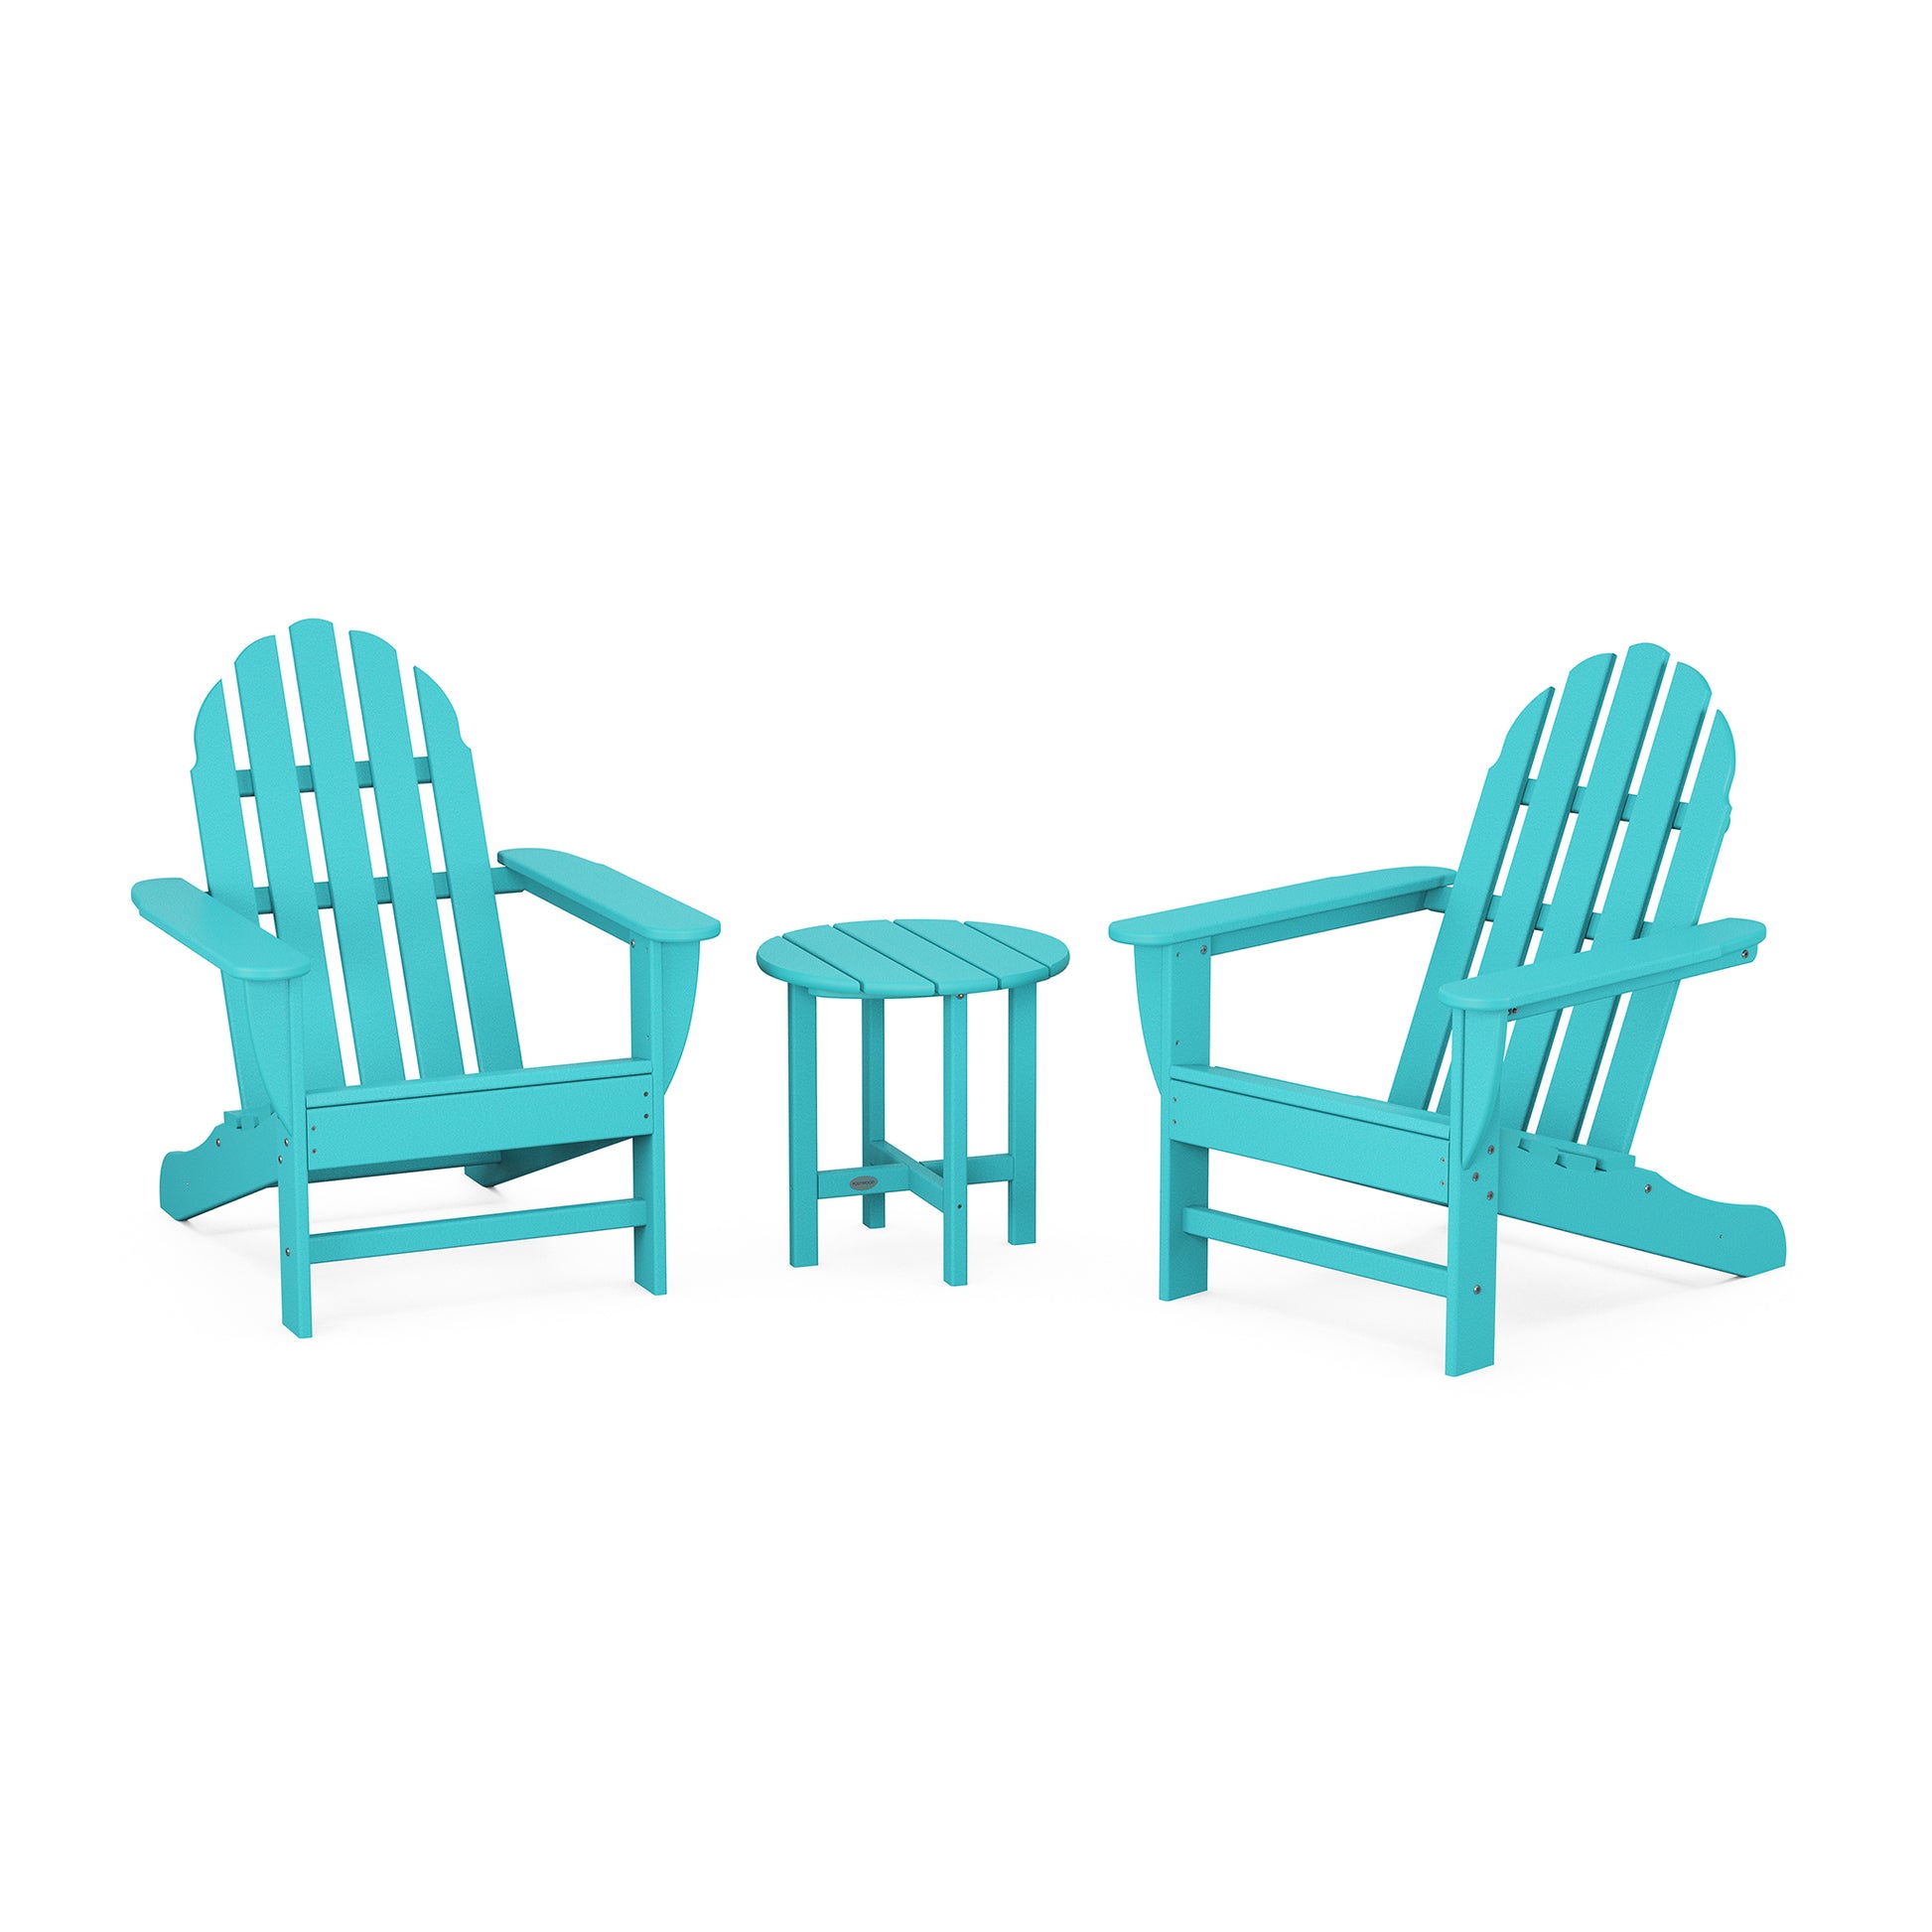 Two turquoise POLYWOOD Classic Adirondack chairs with a matching small round table positioned between them, all set against a plain white background.